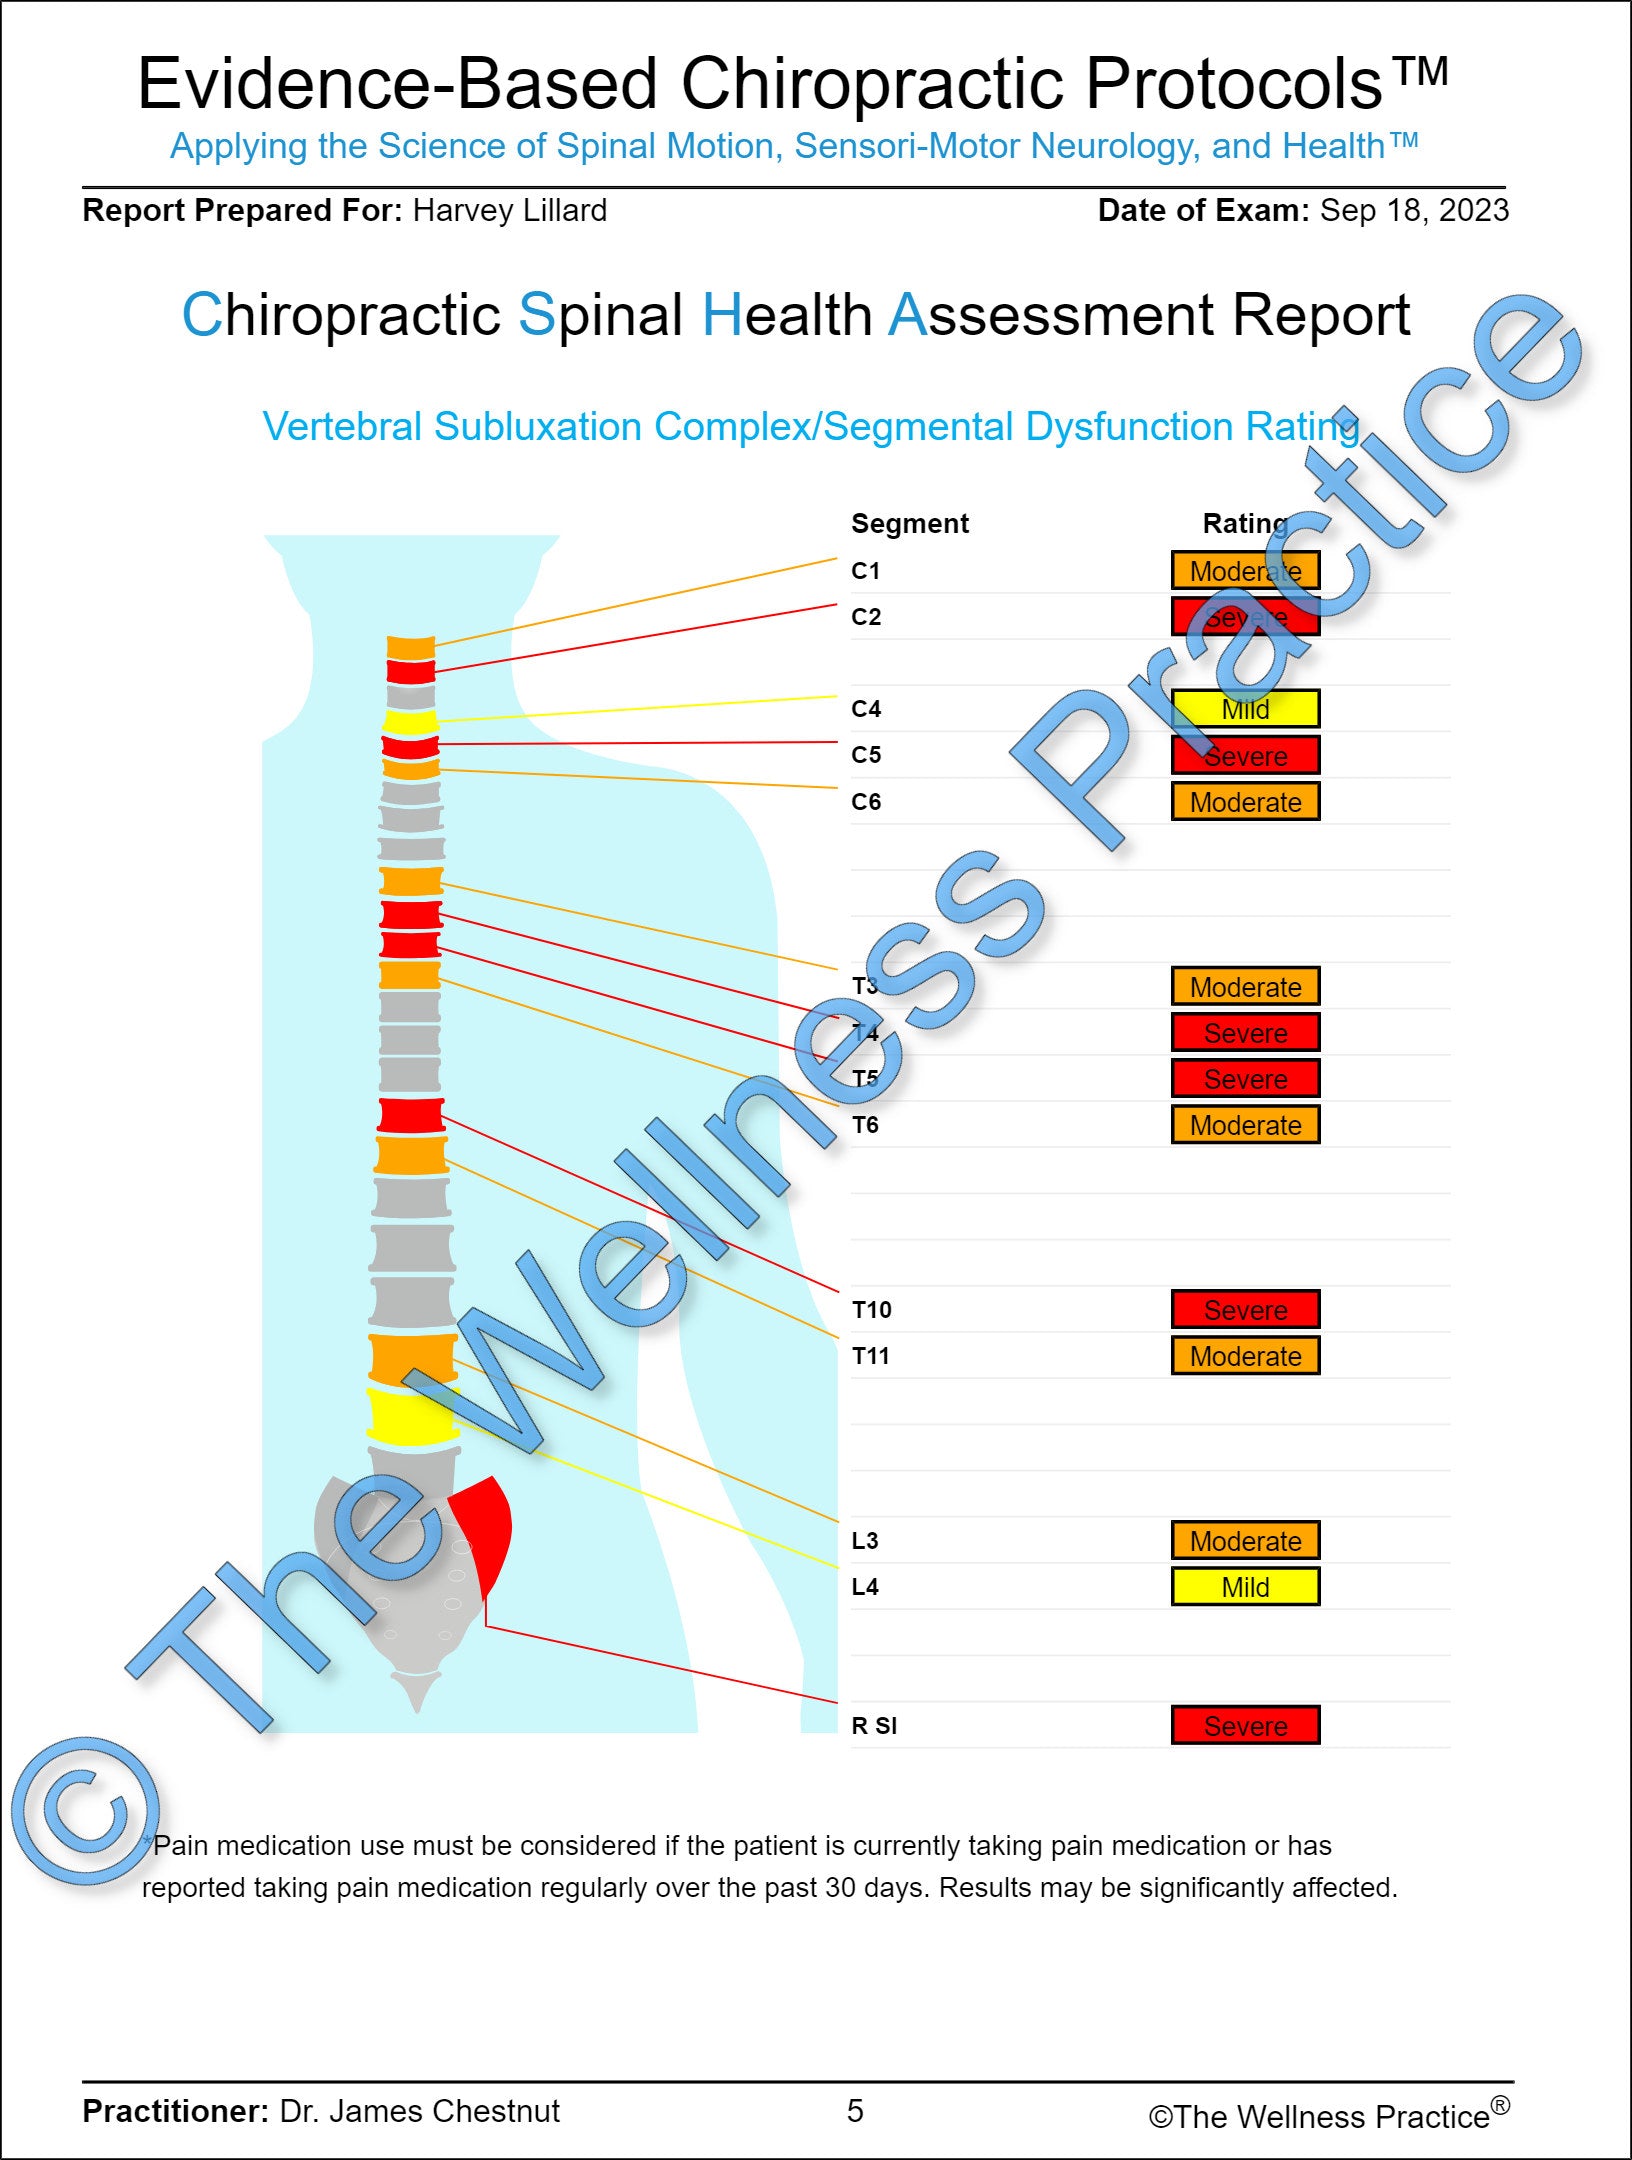 Chiropractic Spinal Health Assessment (CSHA)